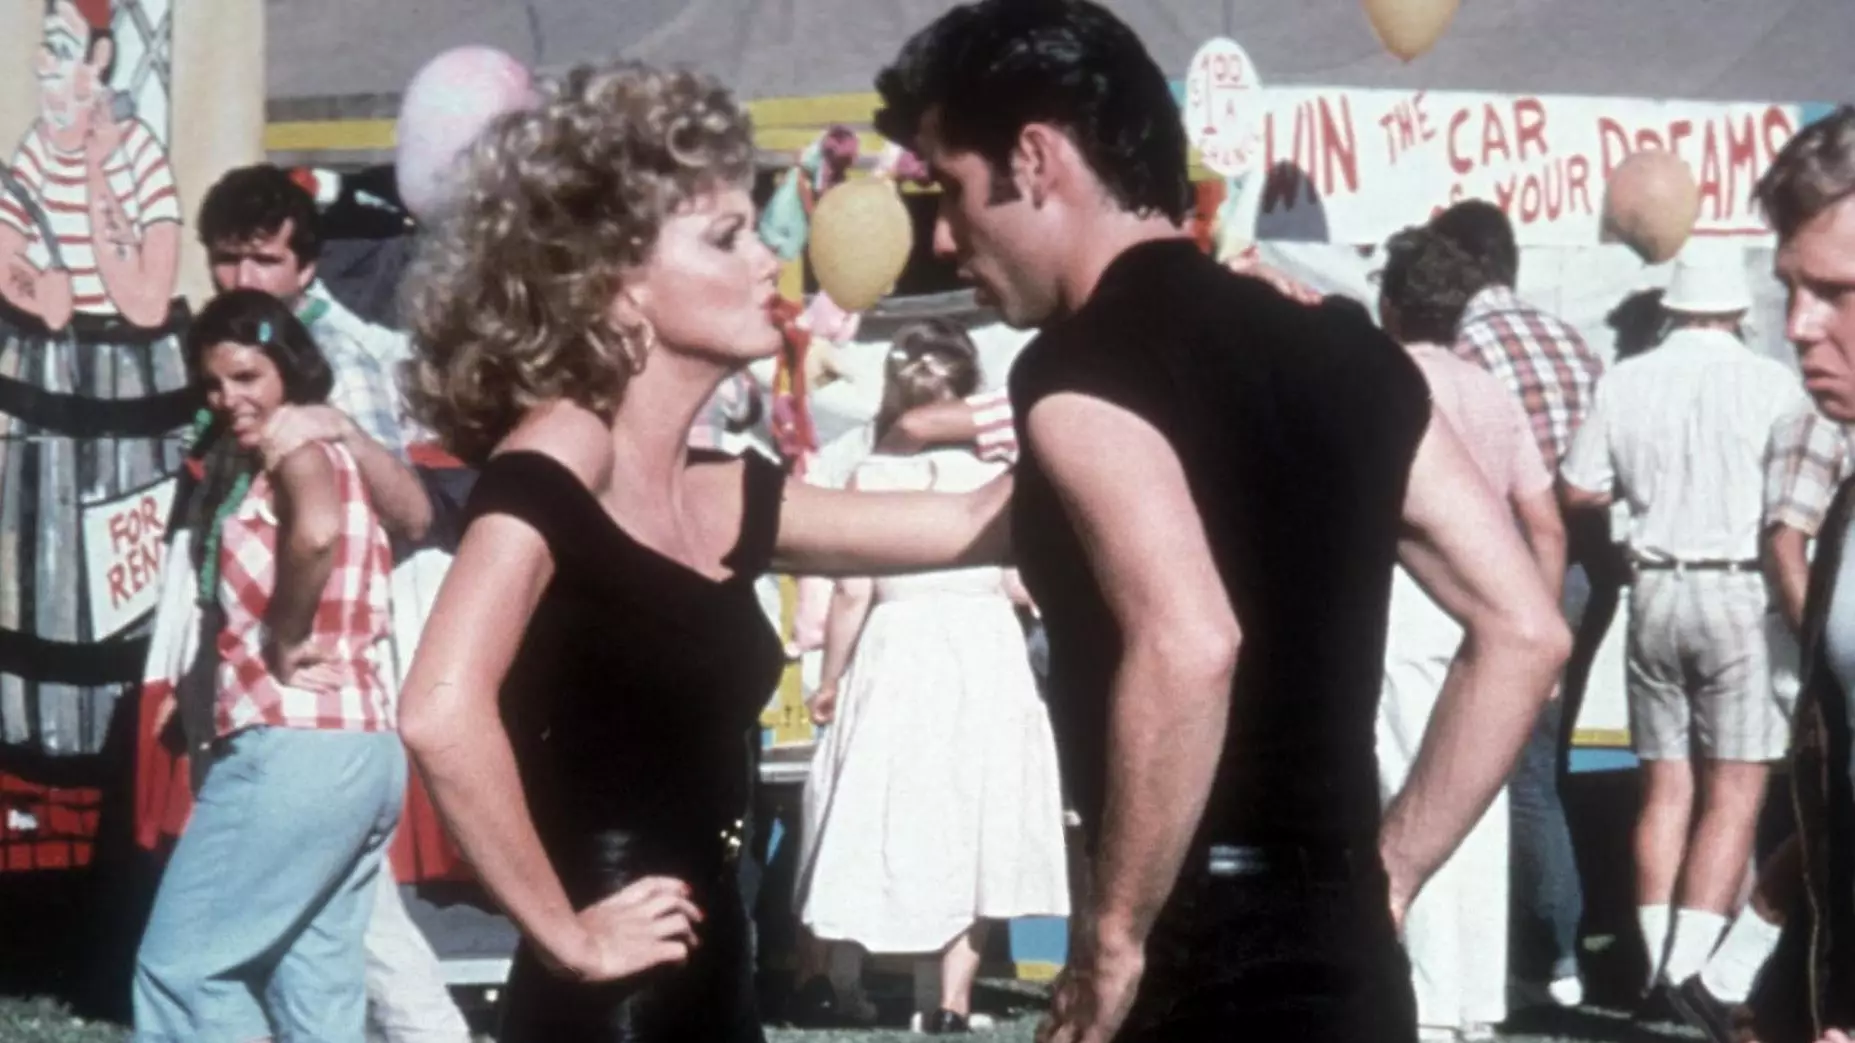 Viewers Slam Grease As 'Rapey', Misogynistic, Homophobic And Lacking Diversity